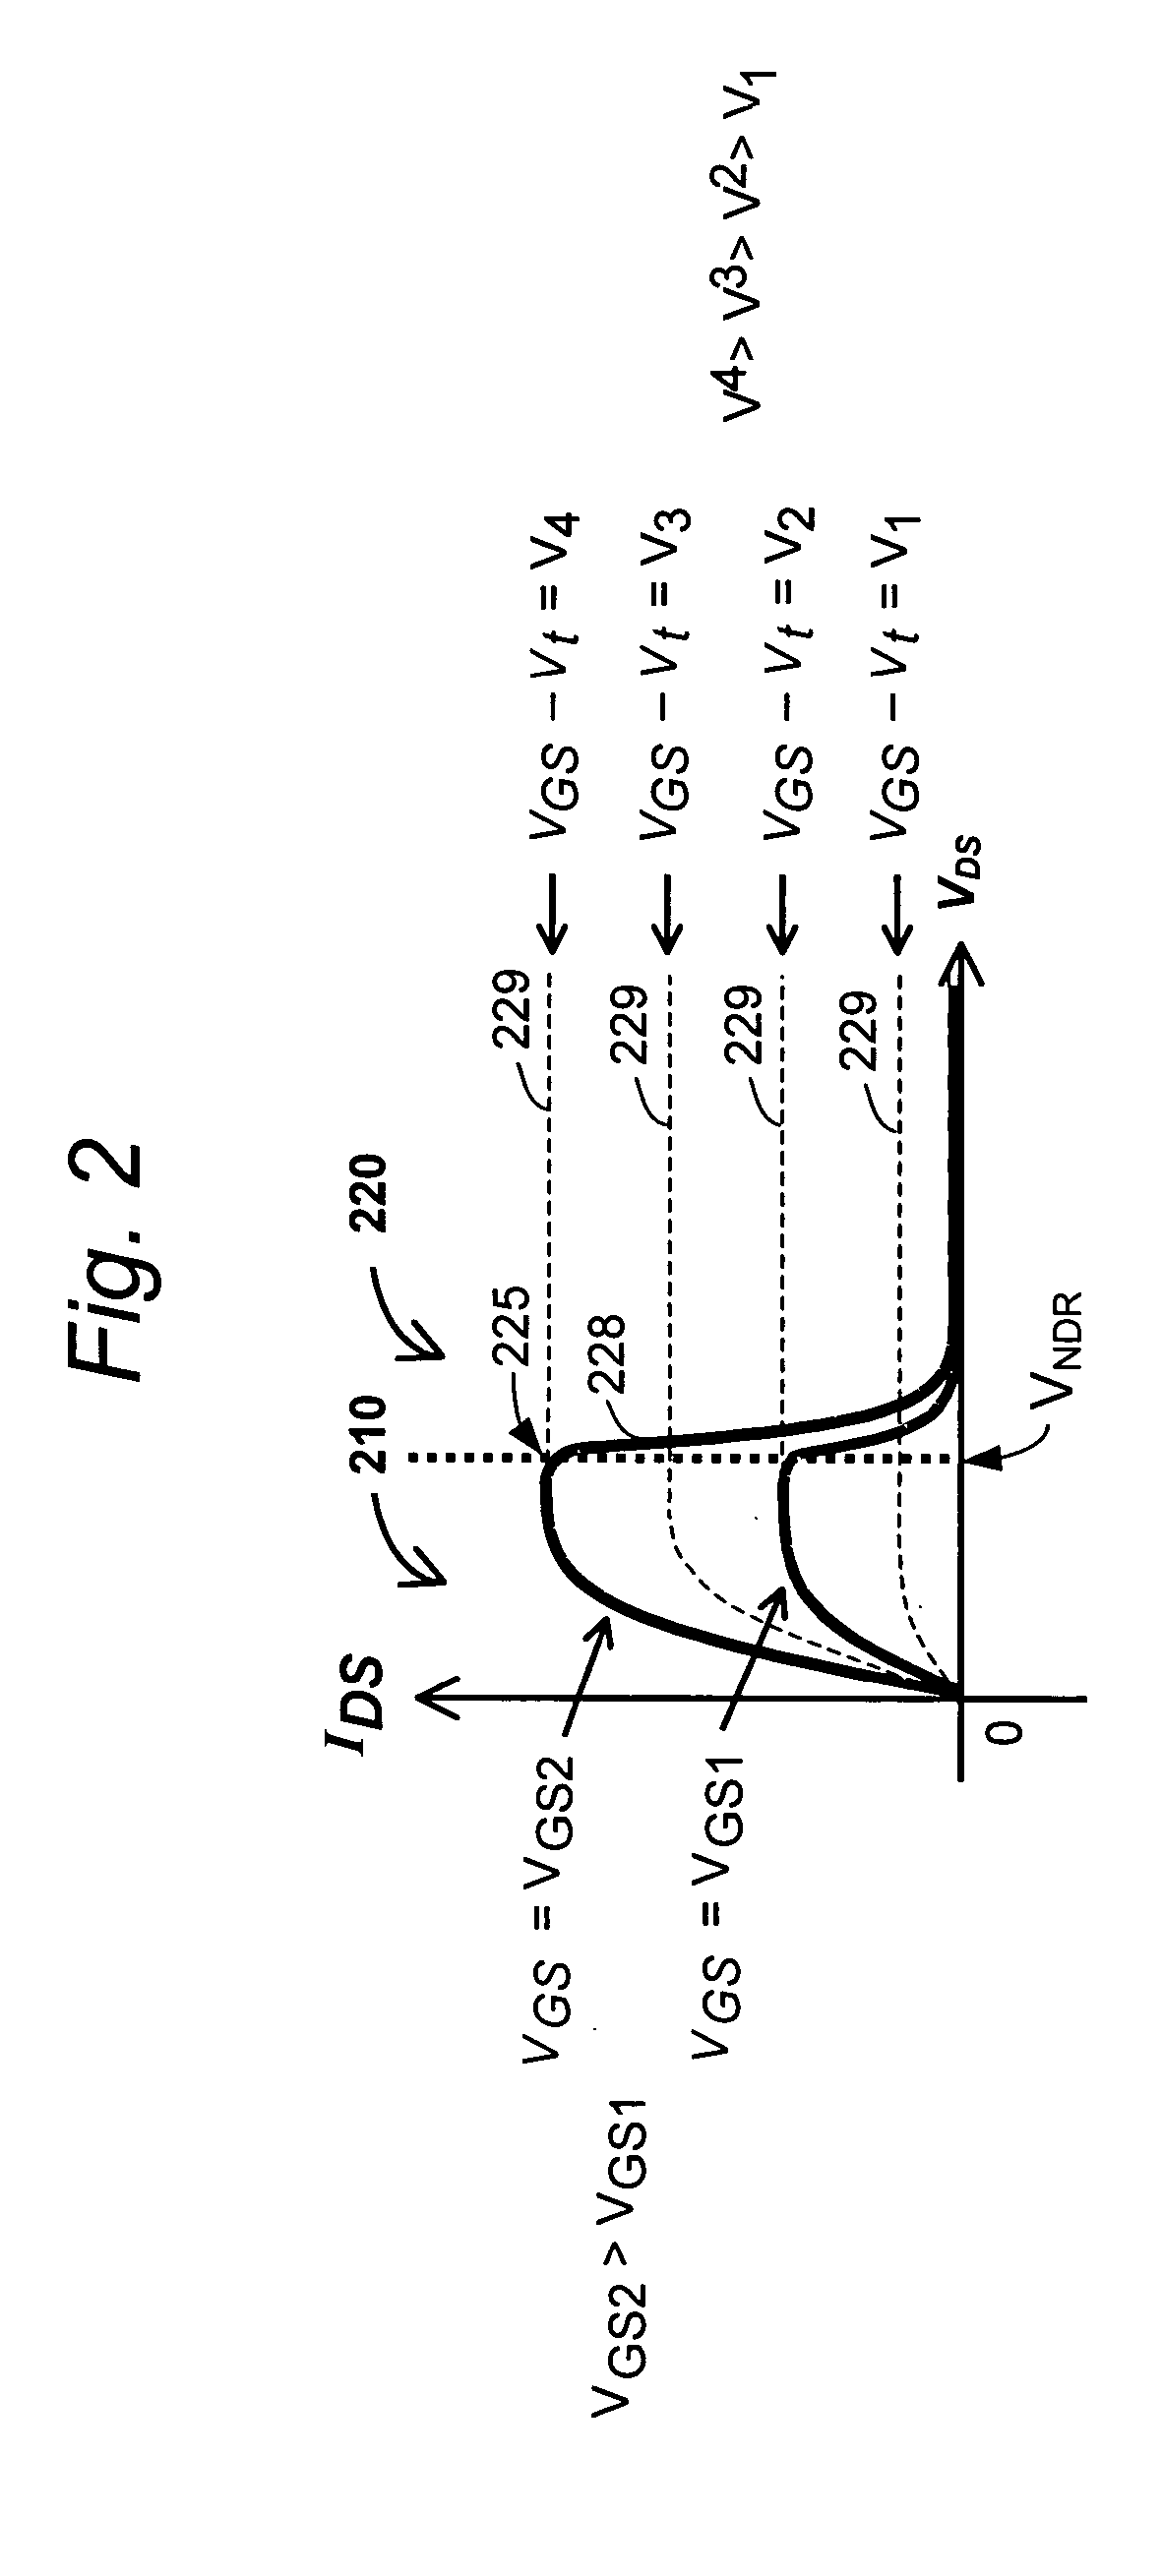 Negative differential resistance pull up element for DRAM